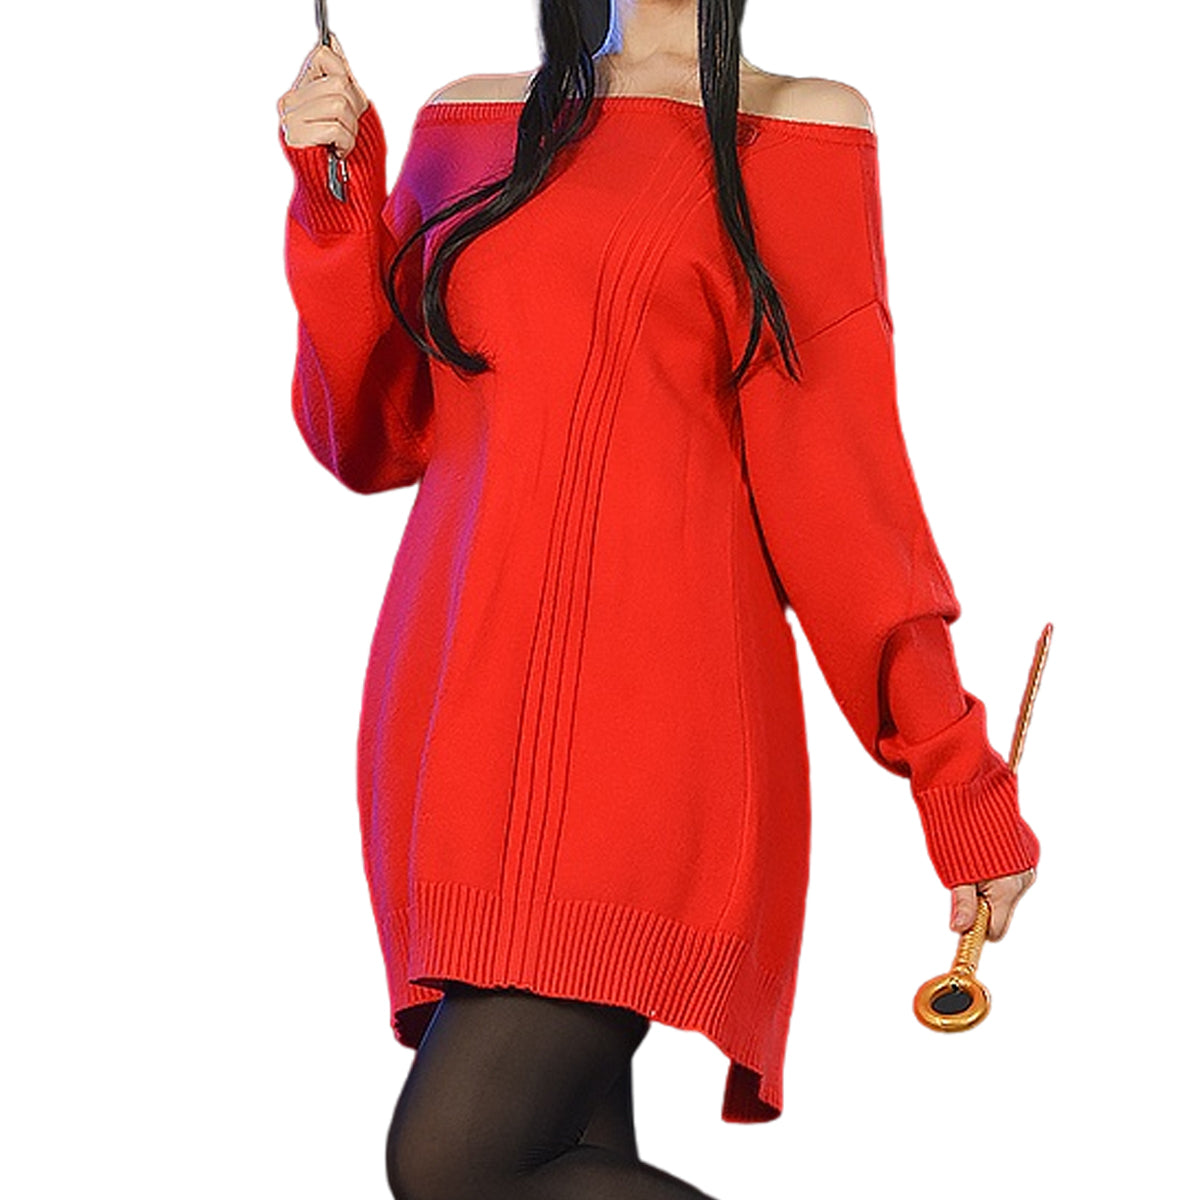 SPY×FAMILY Yor Forger Red Sweater Princess Uniform Women Cosplay